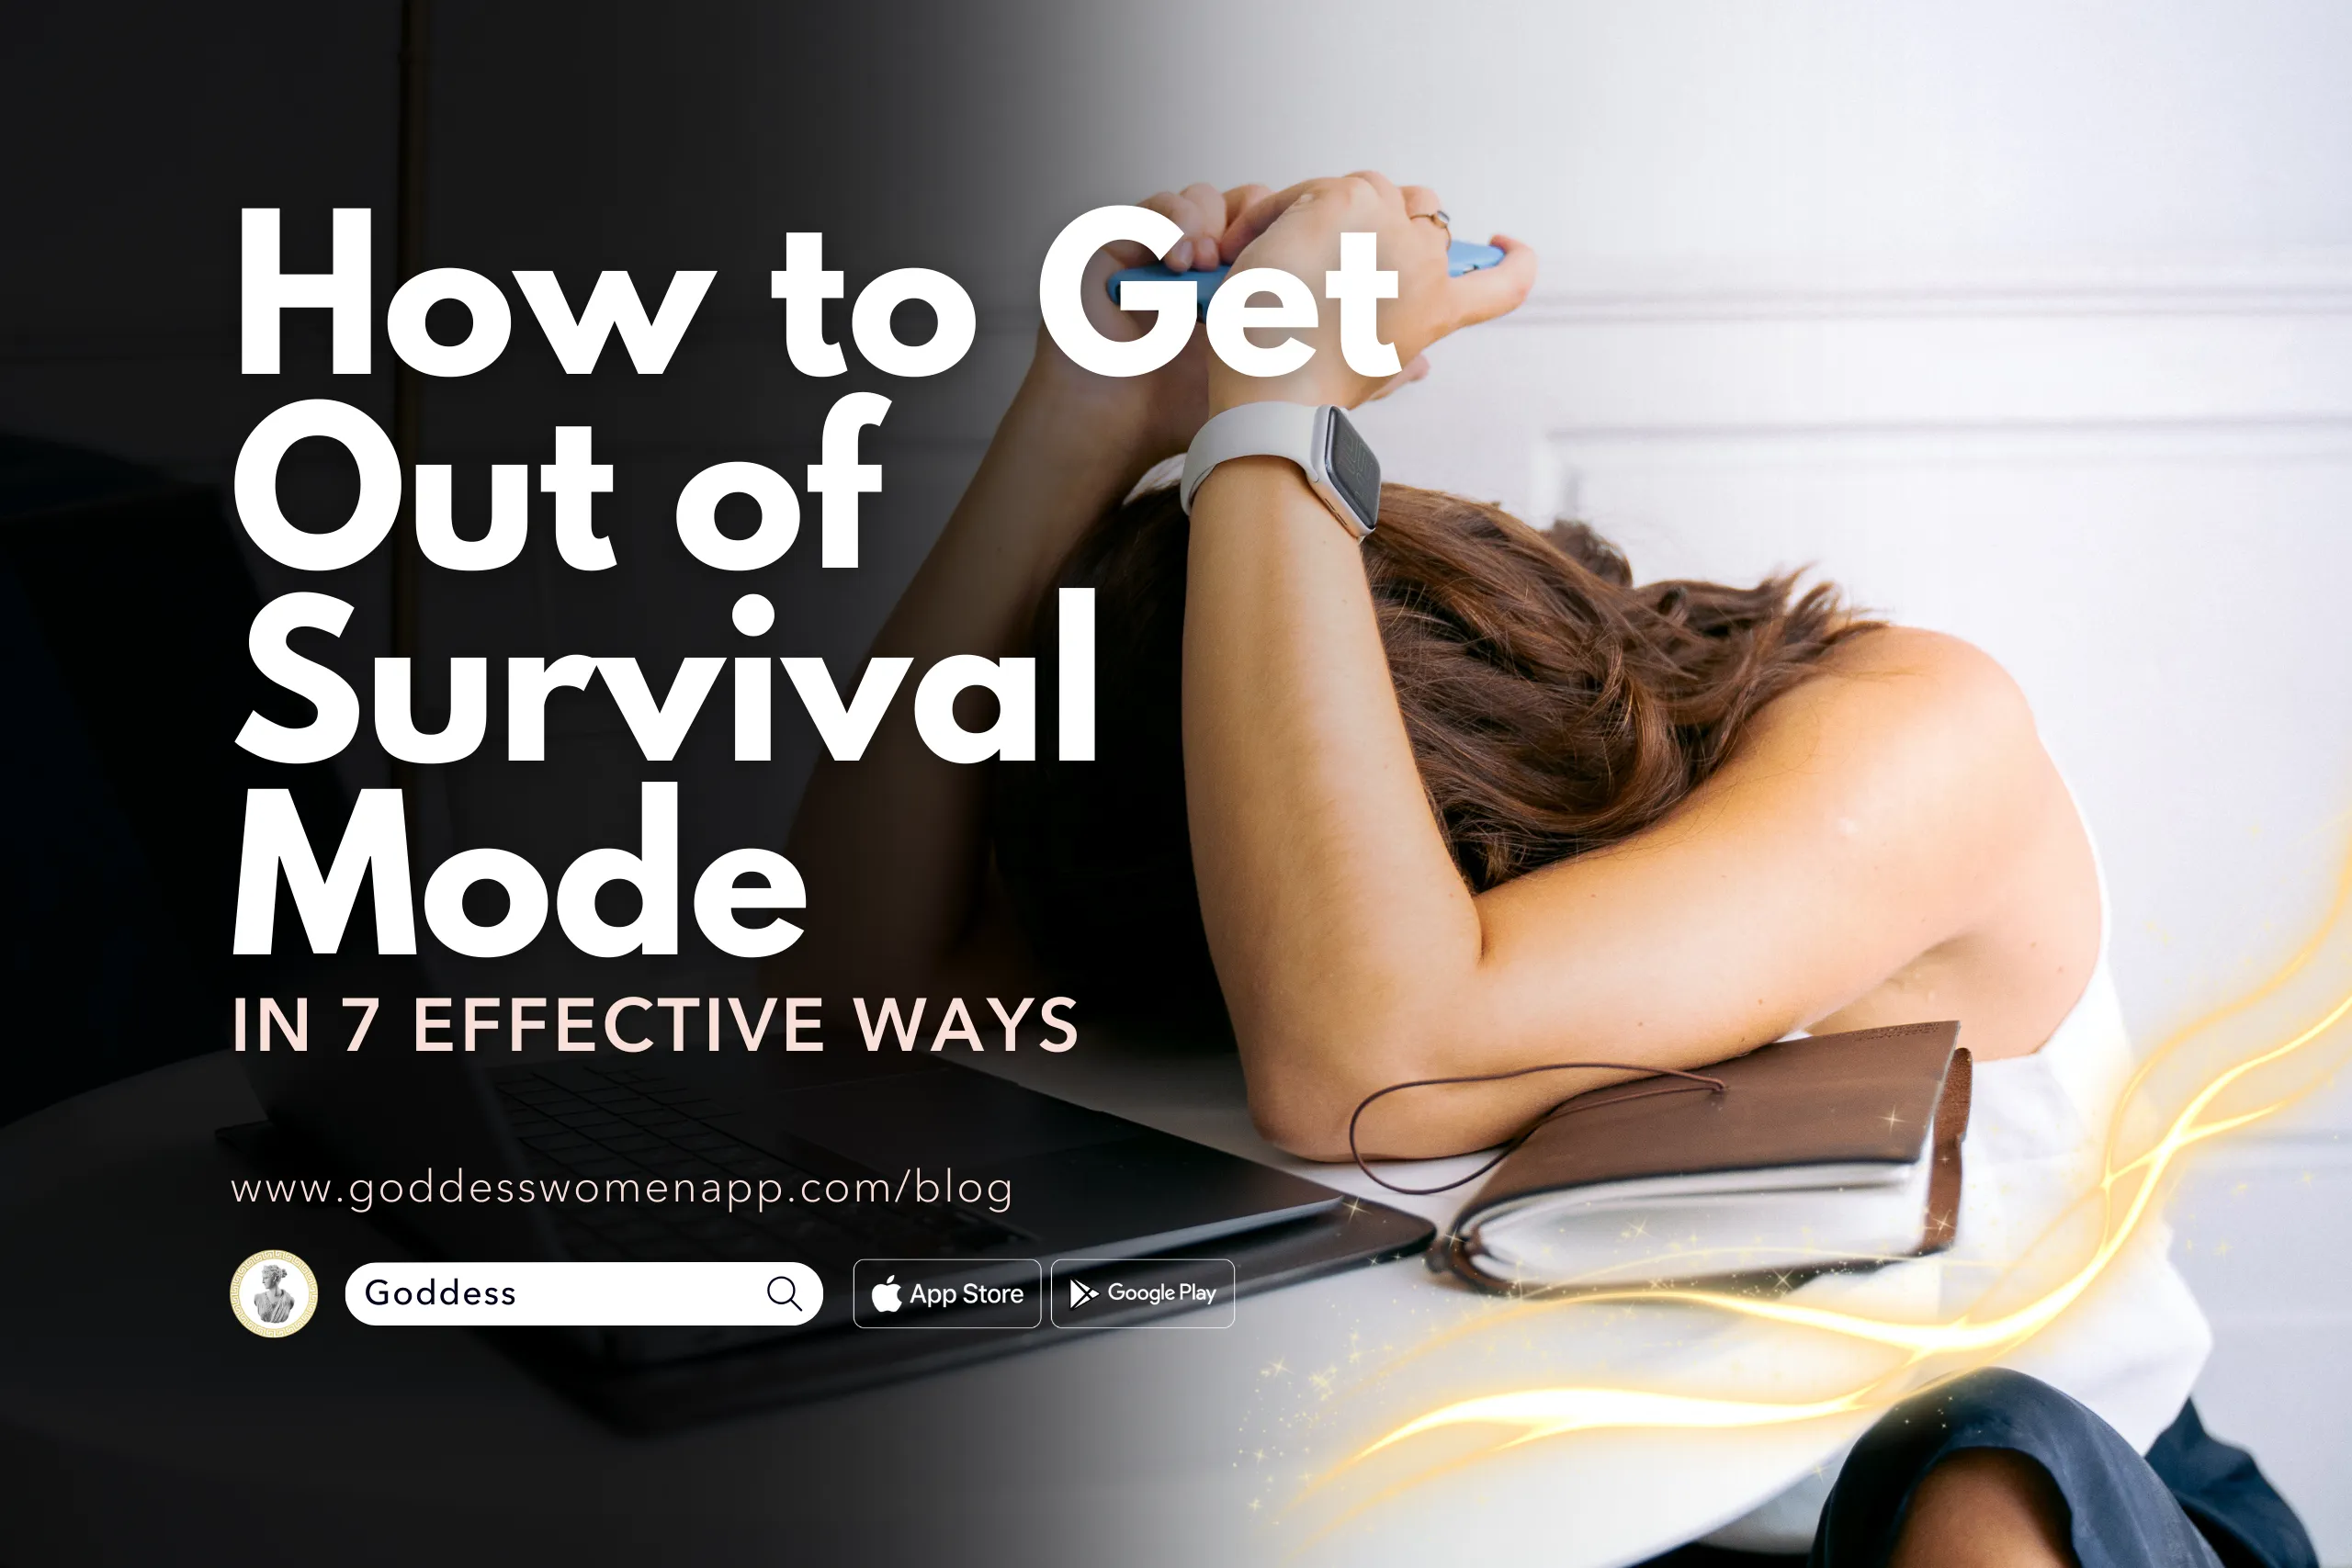 How to Get Out of Survival Mode in 7 Effective Ways